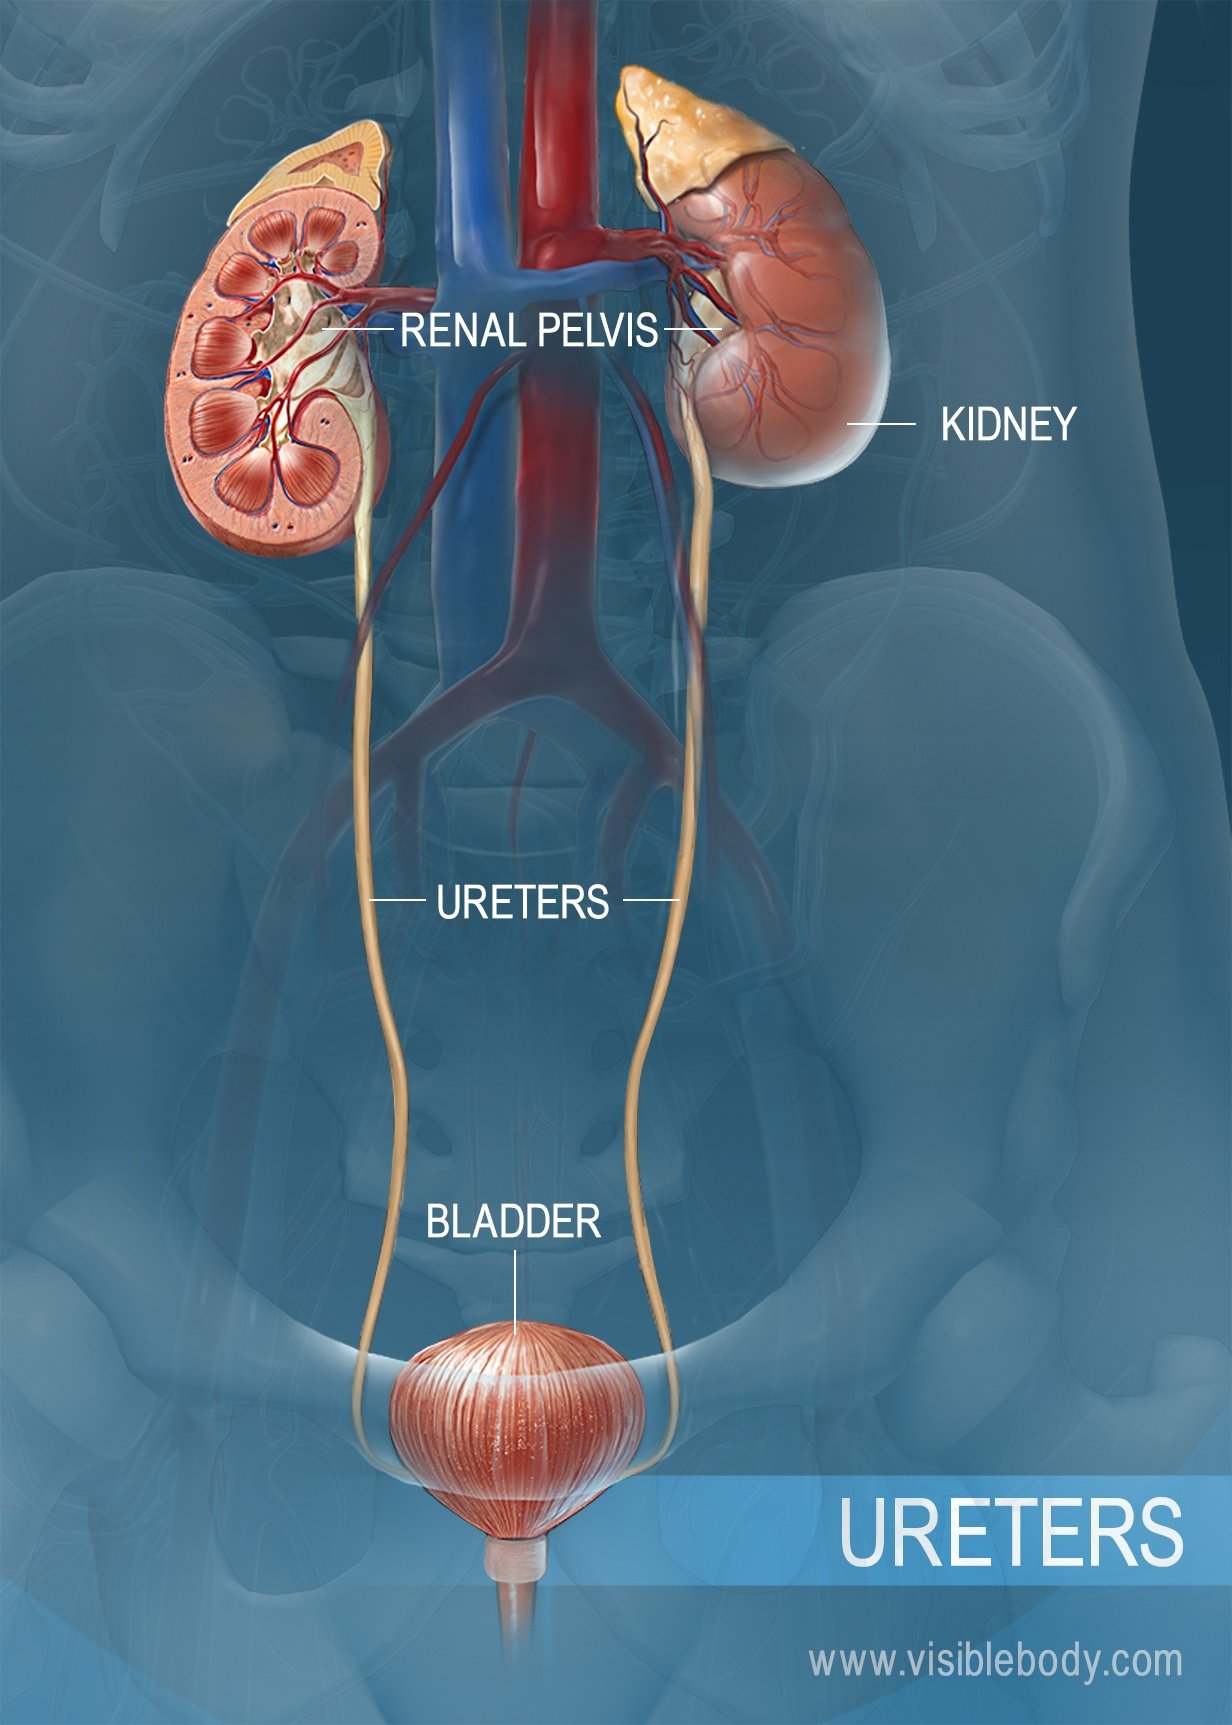 The ureter as it leads from the kidneys to the urinary bladder